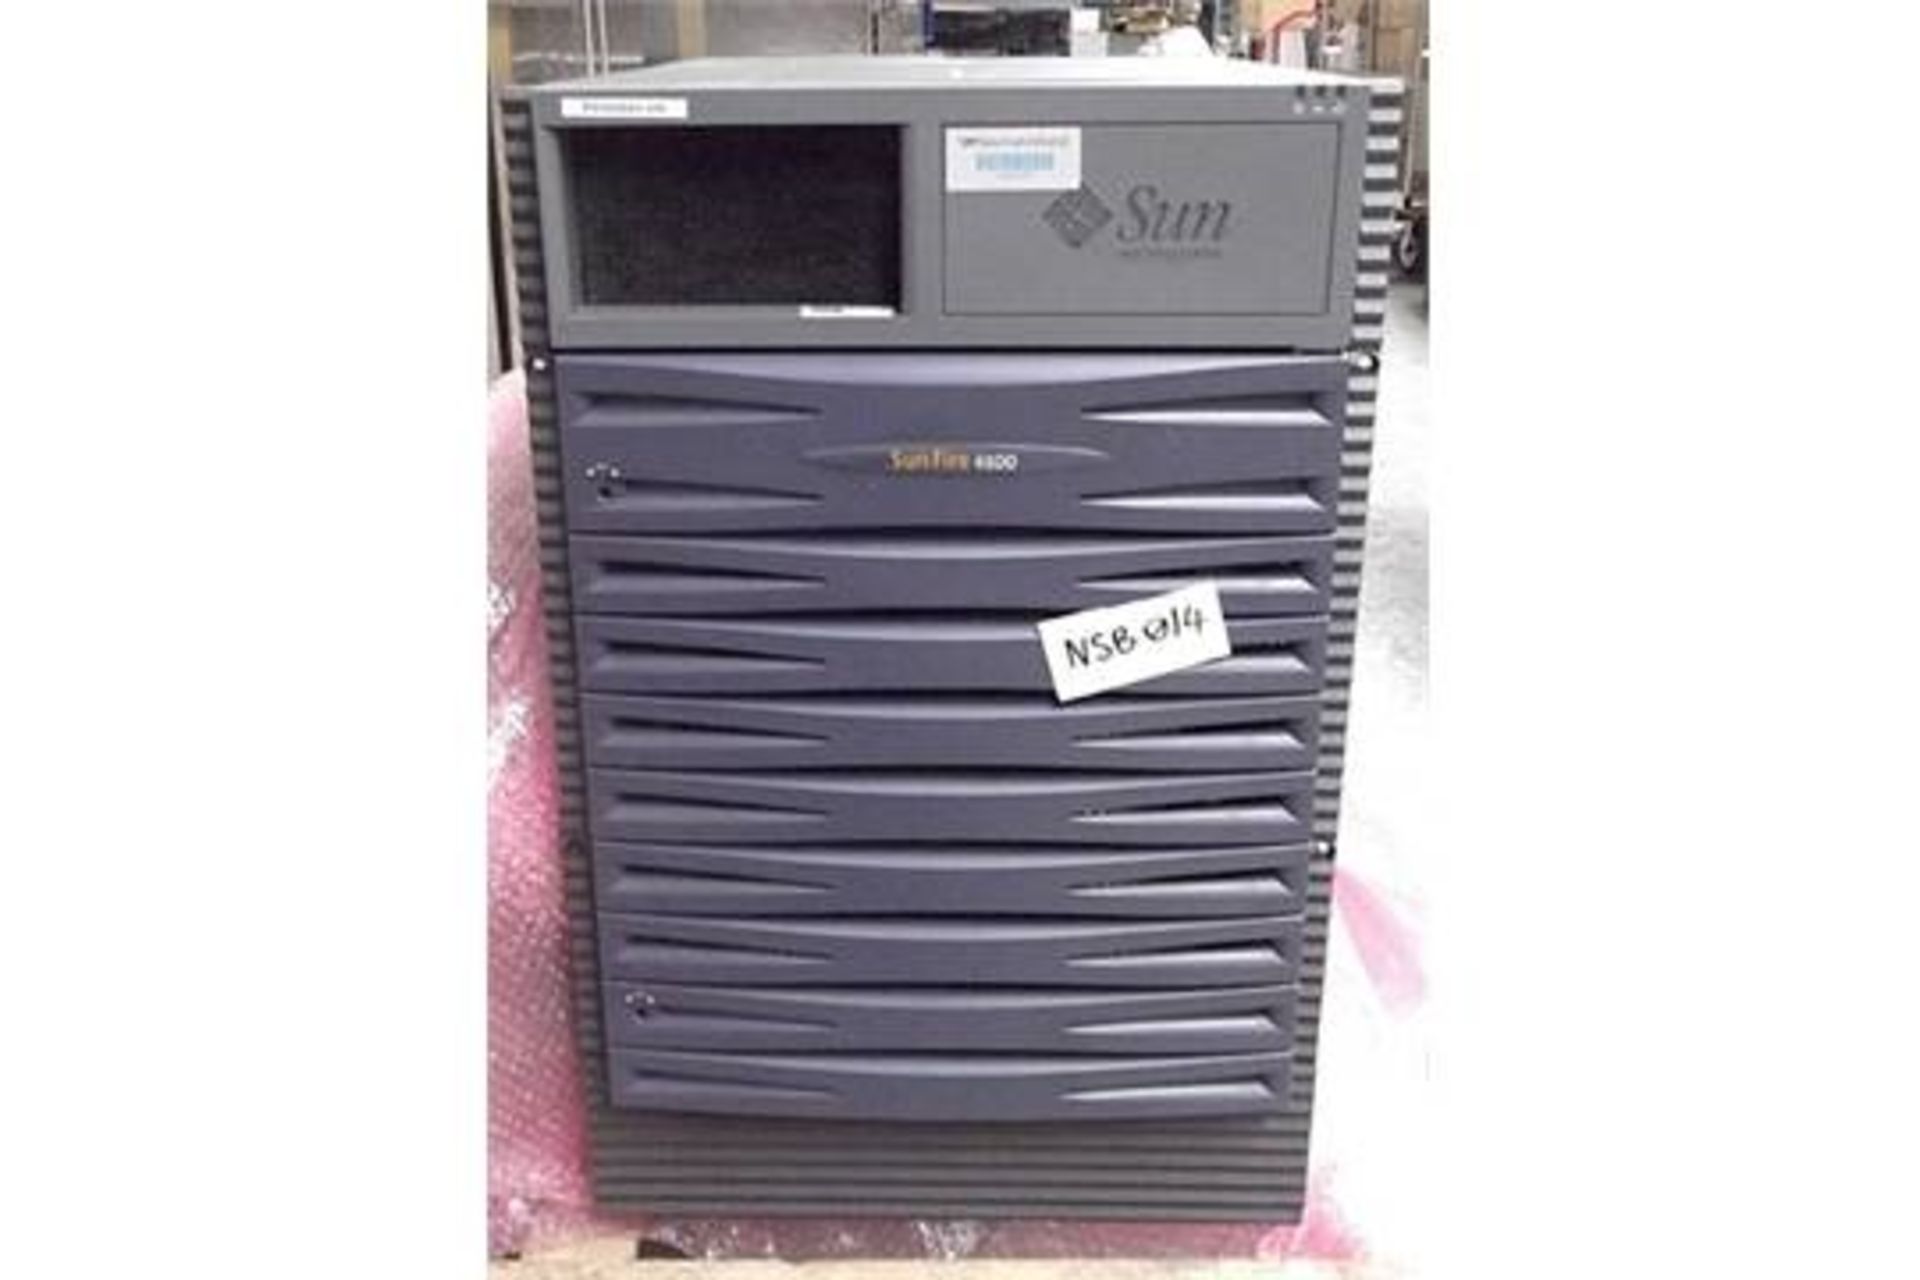 1 x Sun Microsystems Sun Fire 4800 Midframe Server - Ref NSB014 - Recently Removed From A Working Of